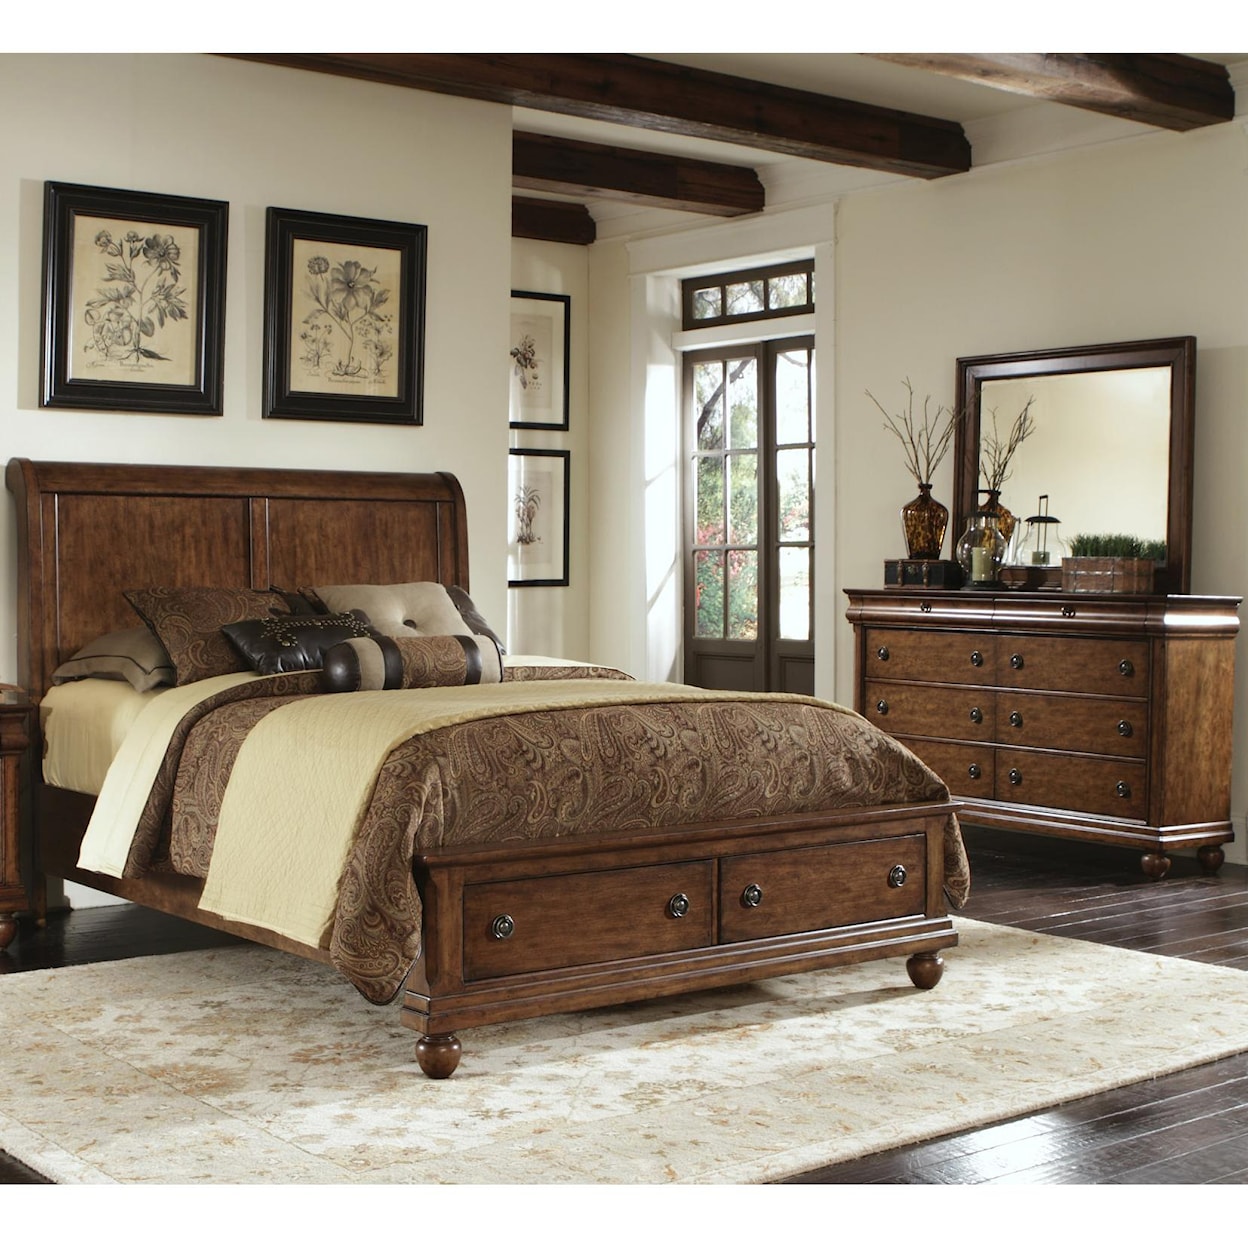 Liberty Furniture Rustic Traditions Queen Bedroom Group 5